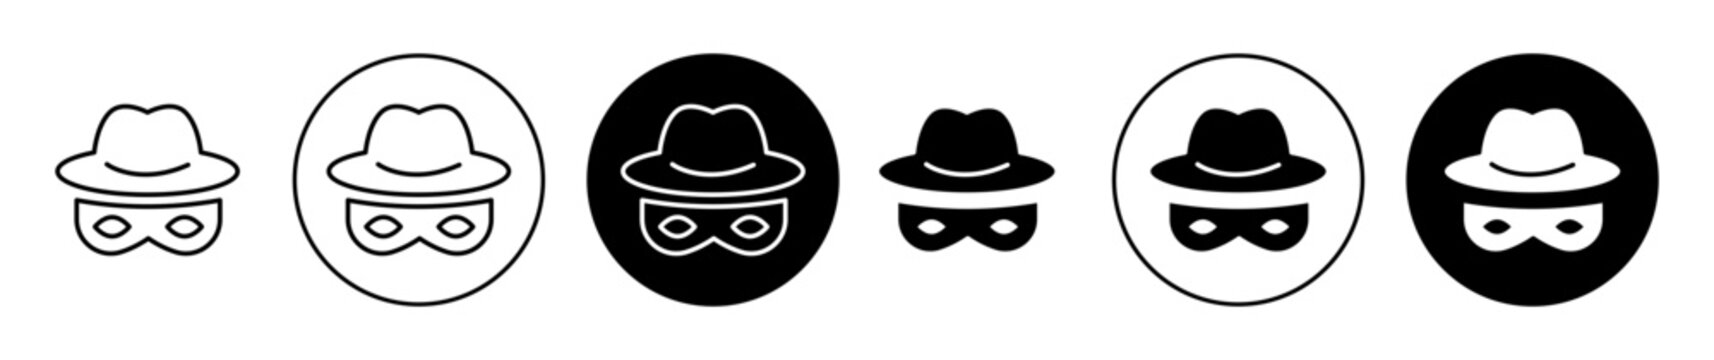 Spy vector icon set in black color. Suitable for apps and website UI designs